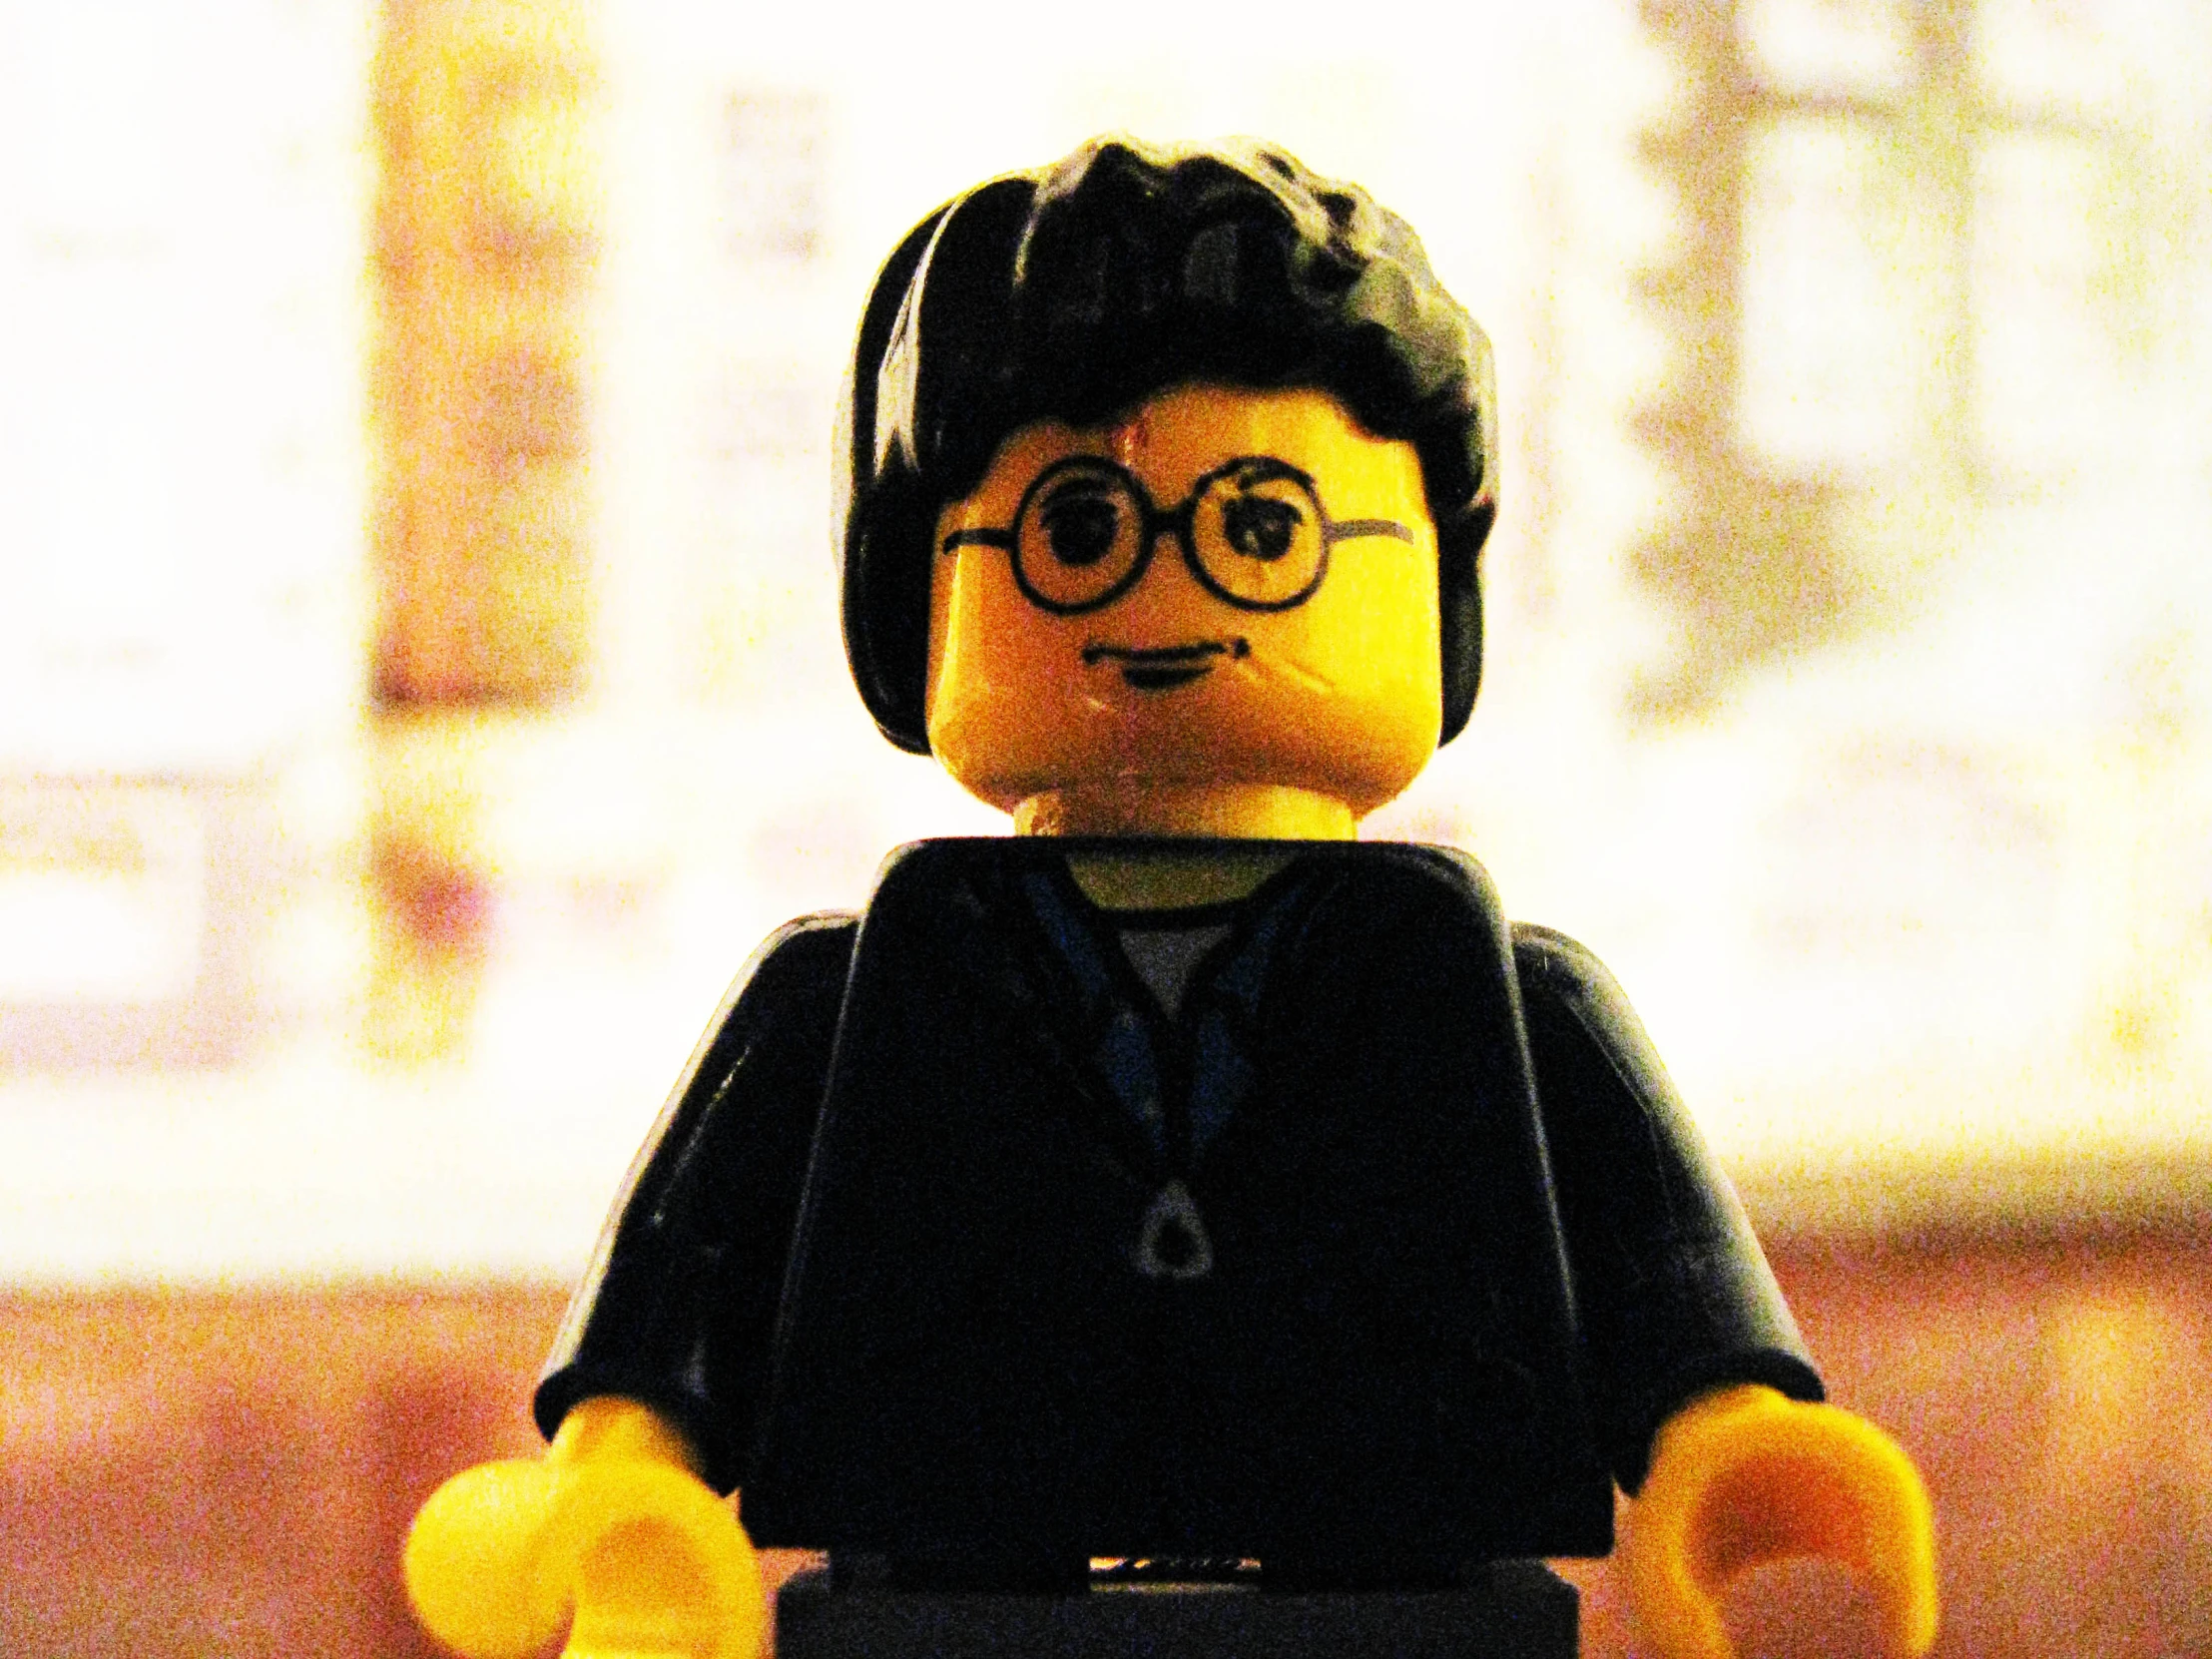 lego figure with black wig and glasses wearing headphones